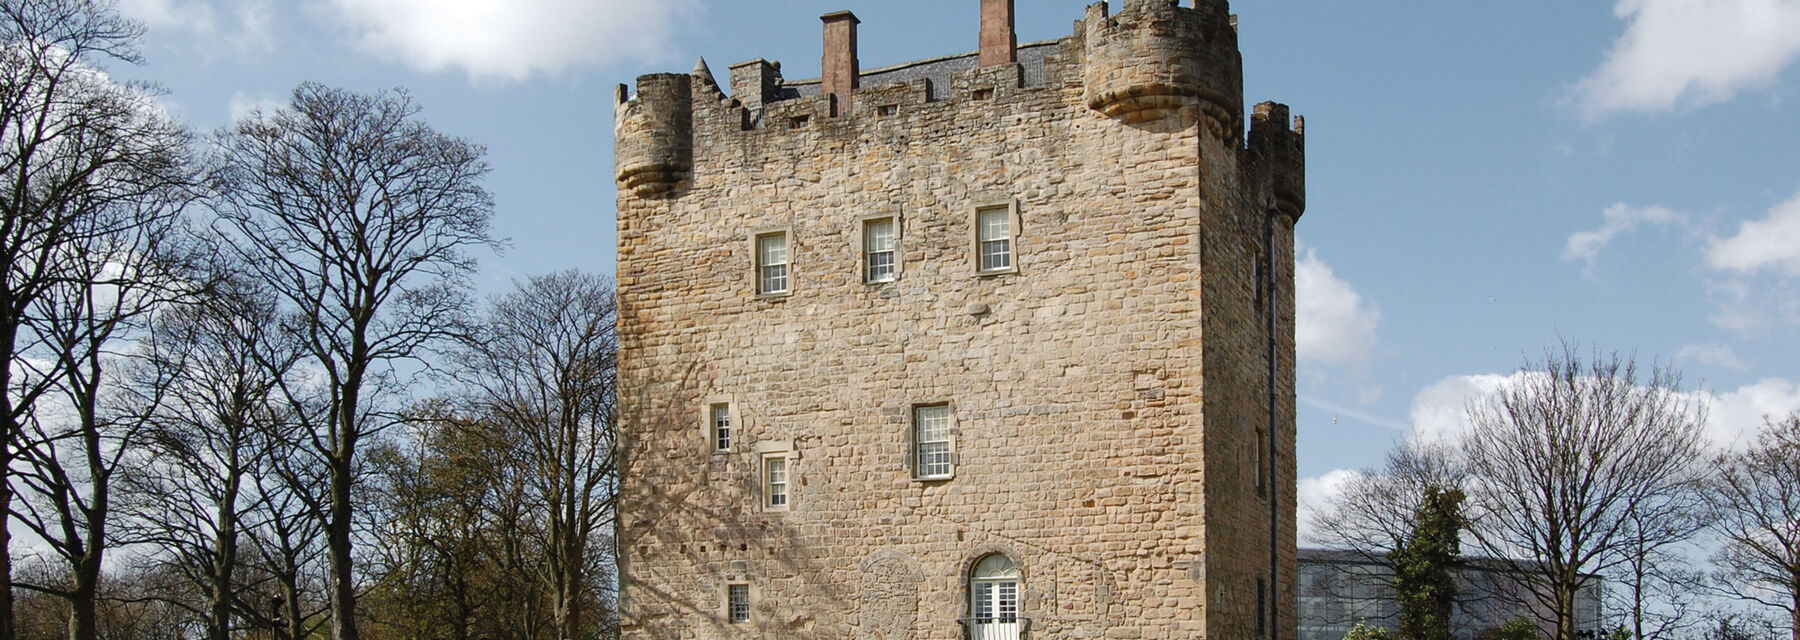 Exterior of Alloa Tower surrounded by bare trees in winter.